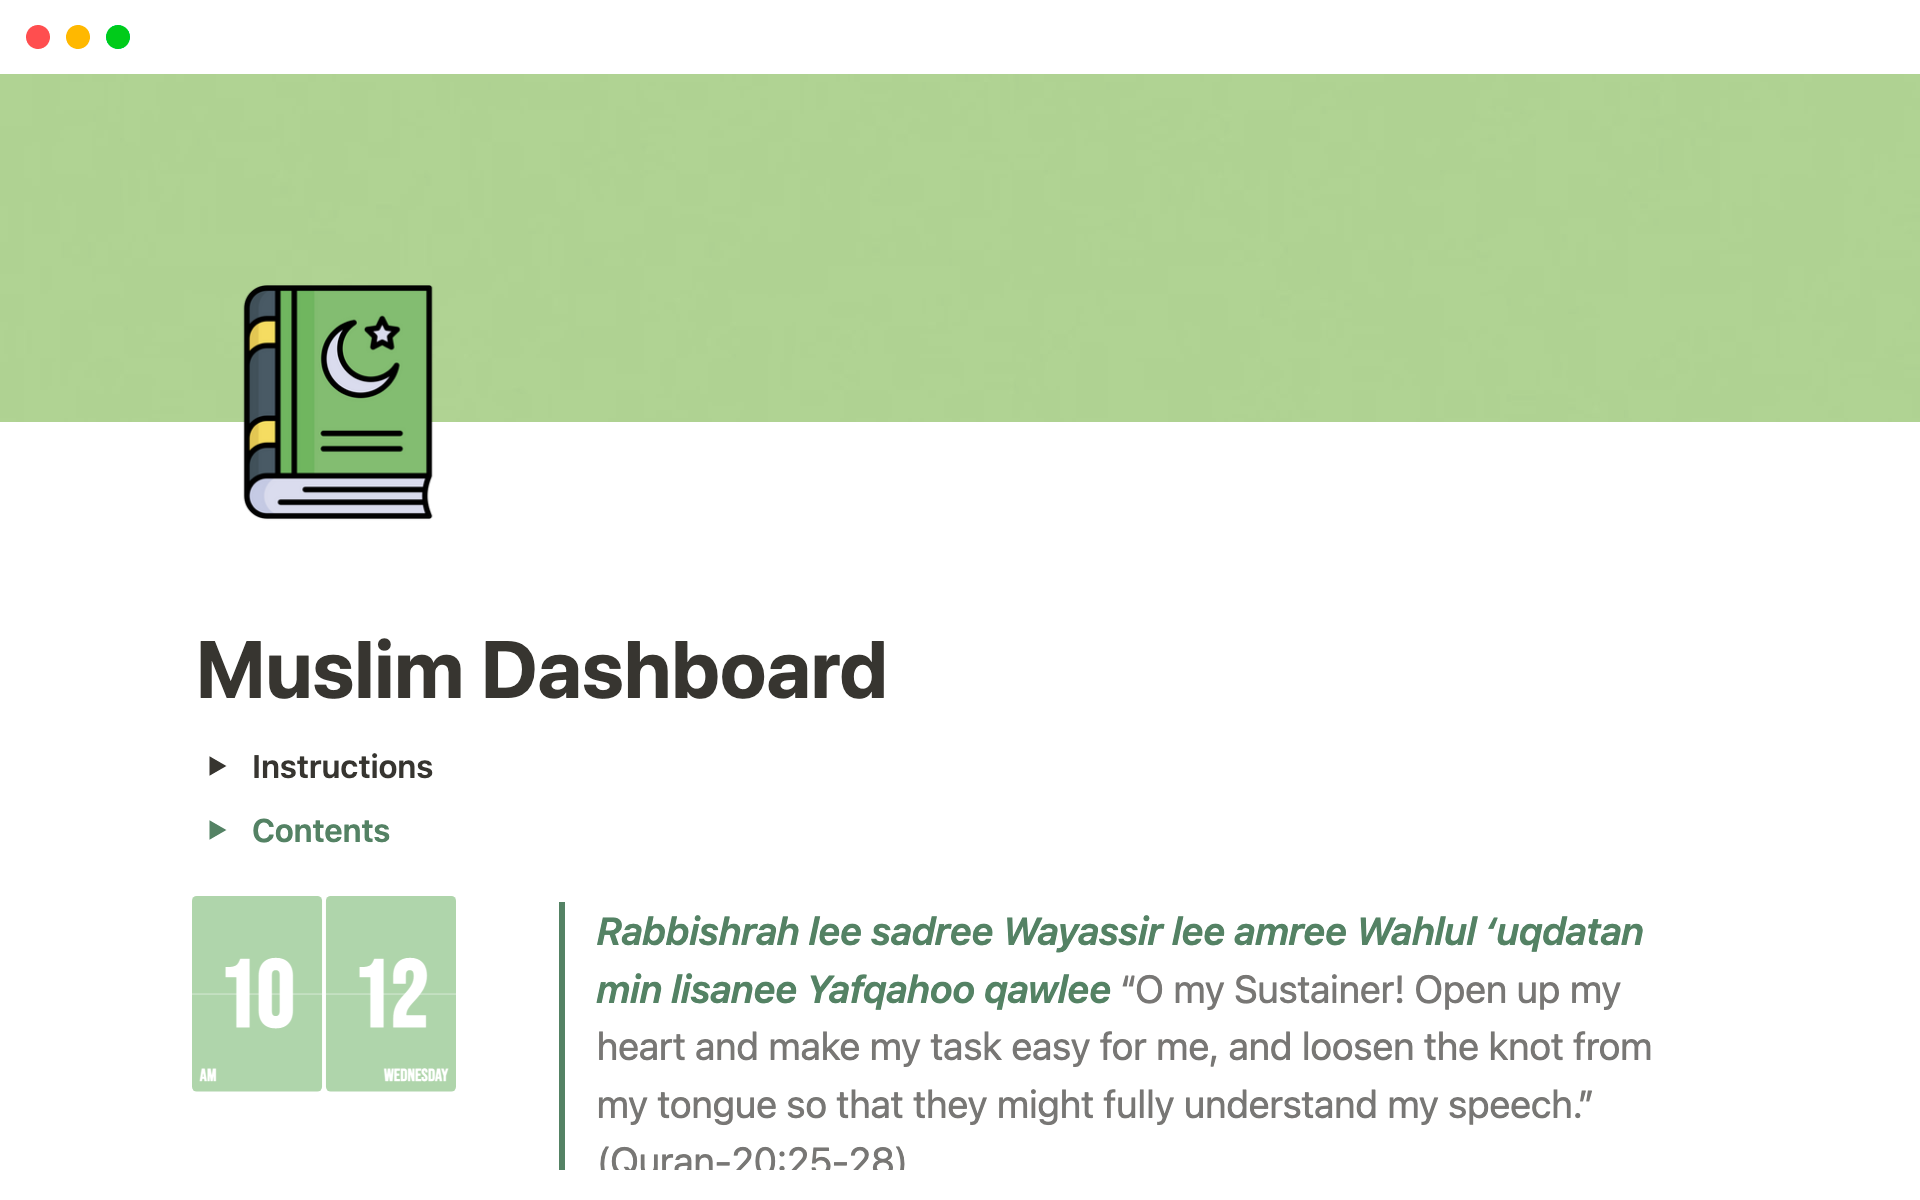 The Muslim dashboard template enhances and simplifies daily Islamic routines with customizable features such as automatic prayer times, a Hijri calendar, Ramadan and Eid countdowns, habit and goal trackers, and more.